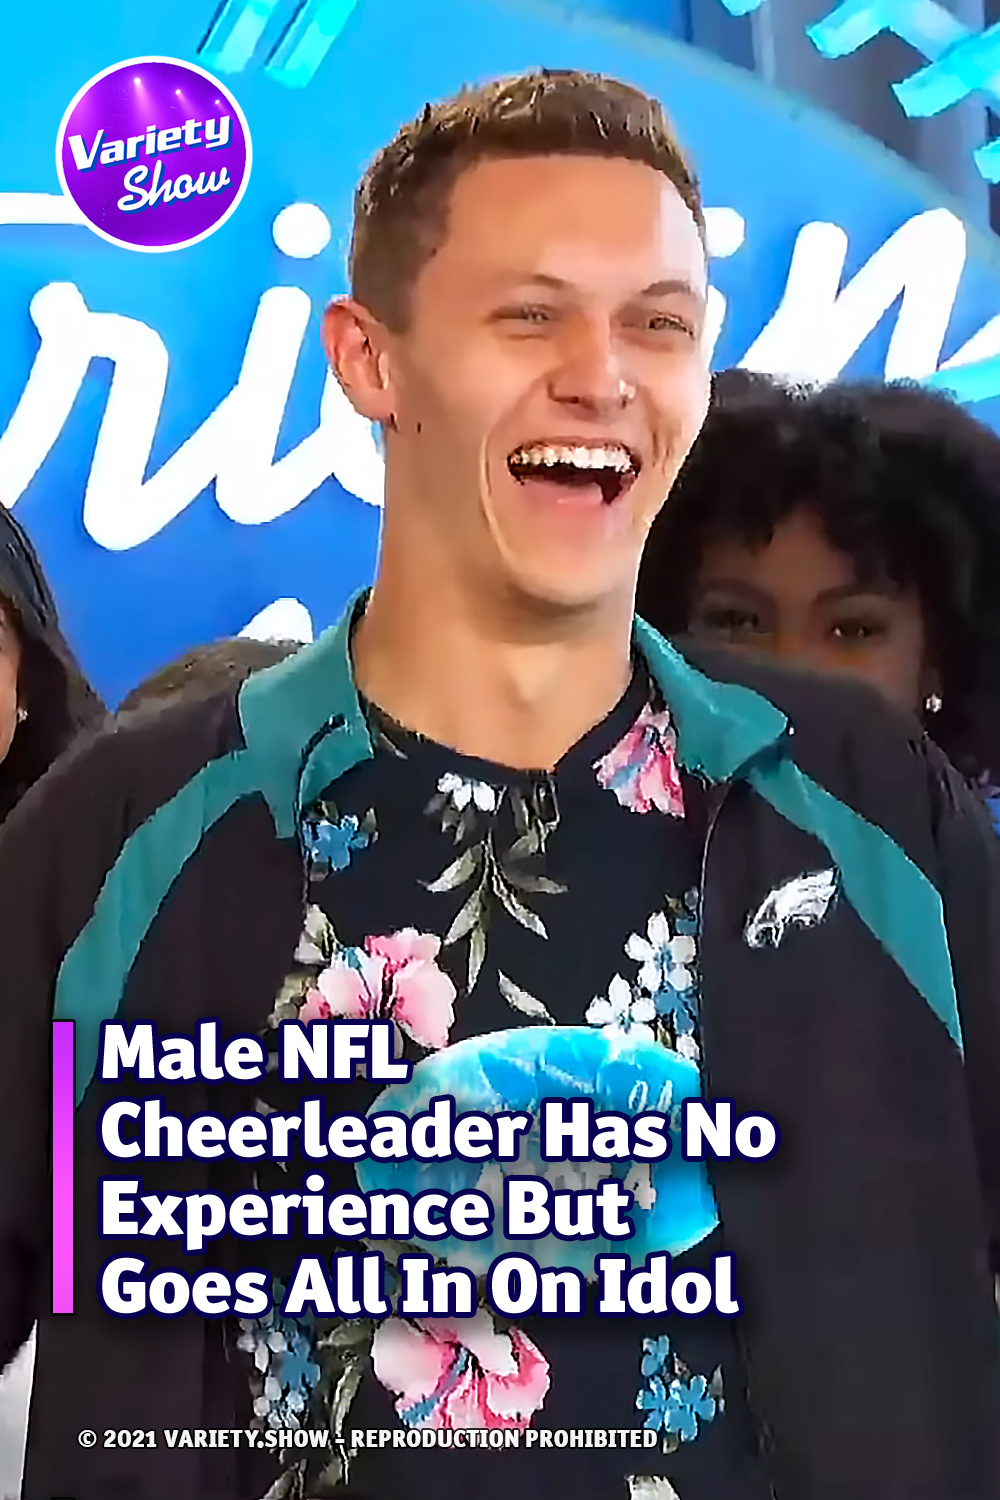 Male NFL Cheerleader Has No Experience But Goes All In On Idol